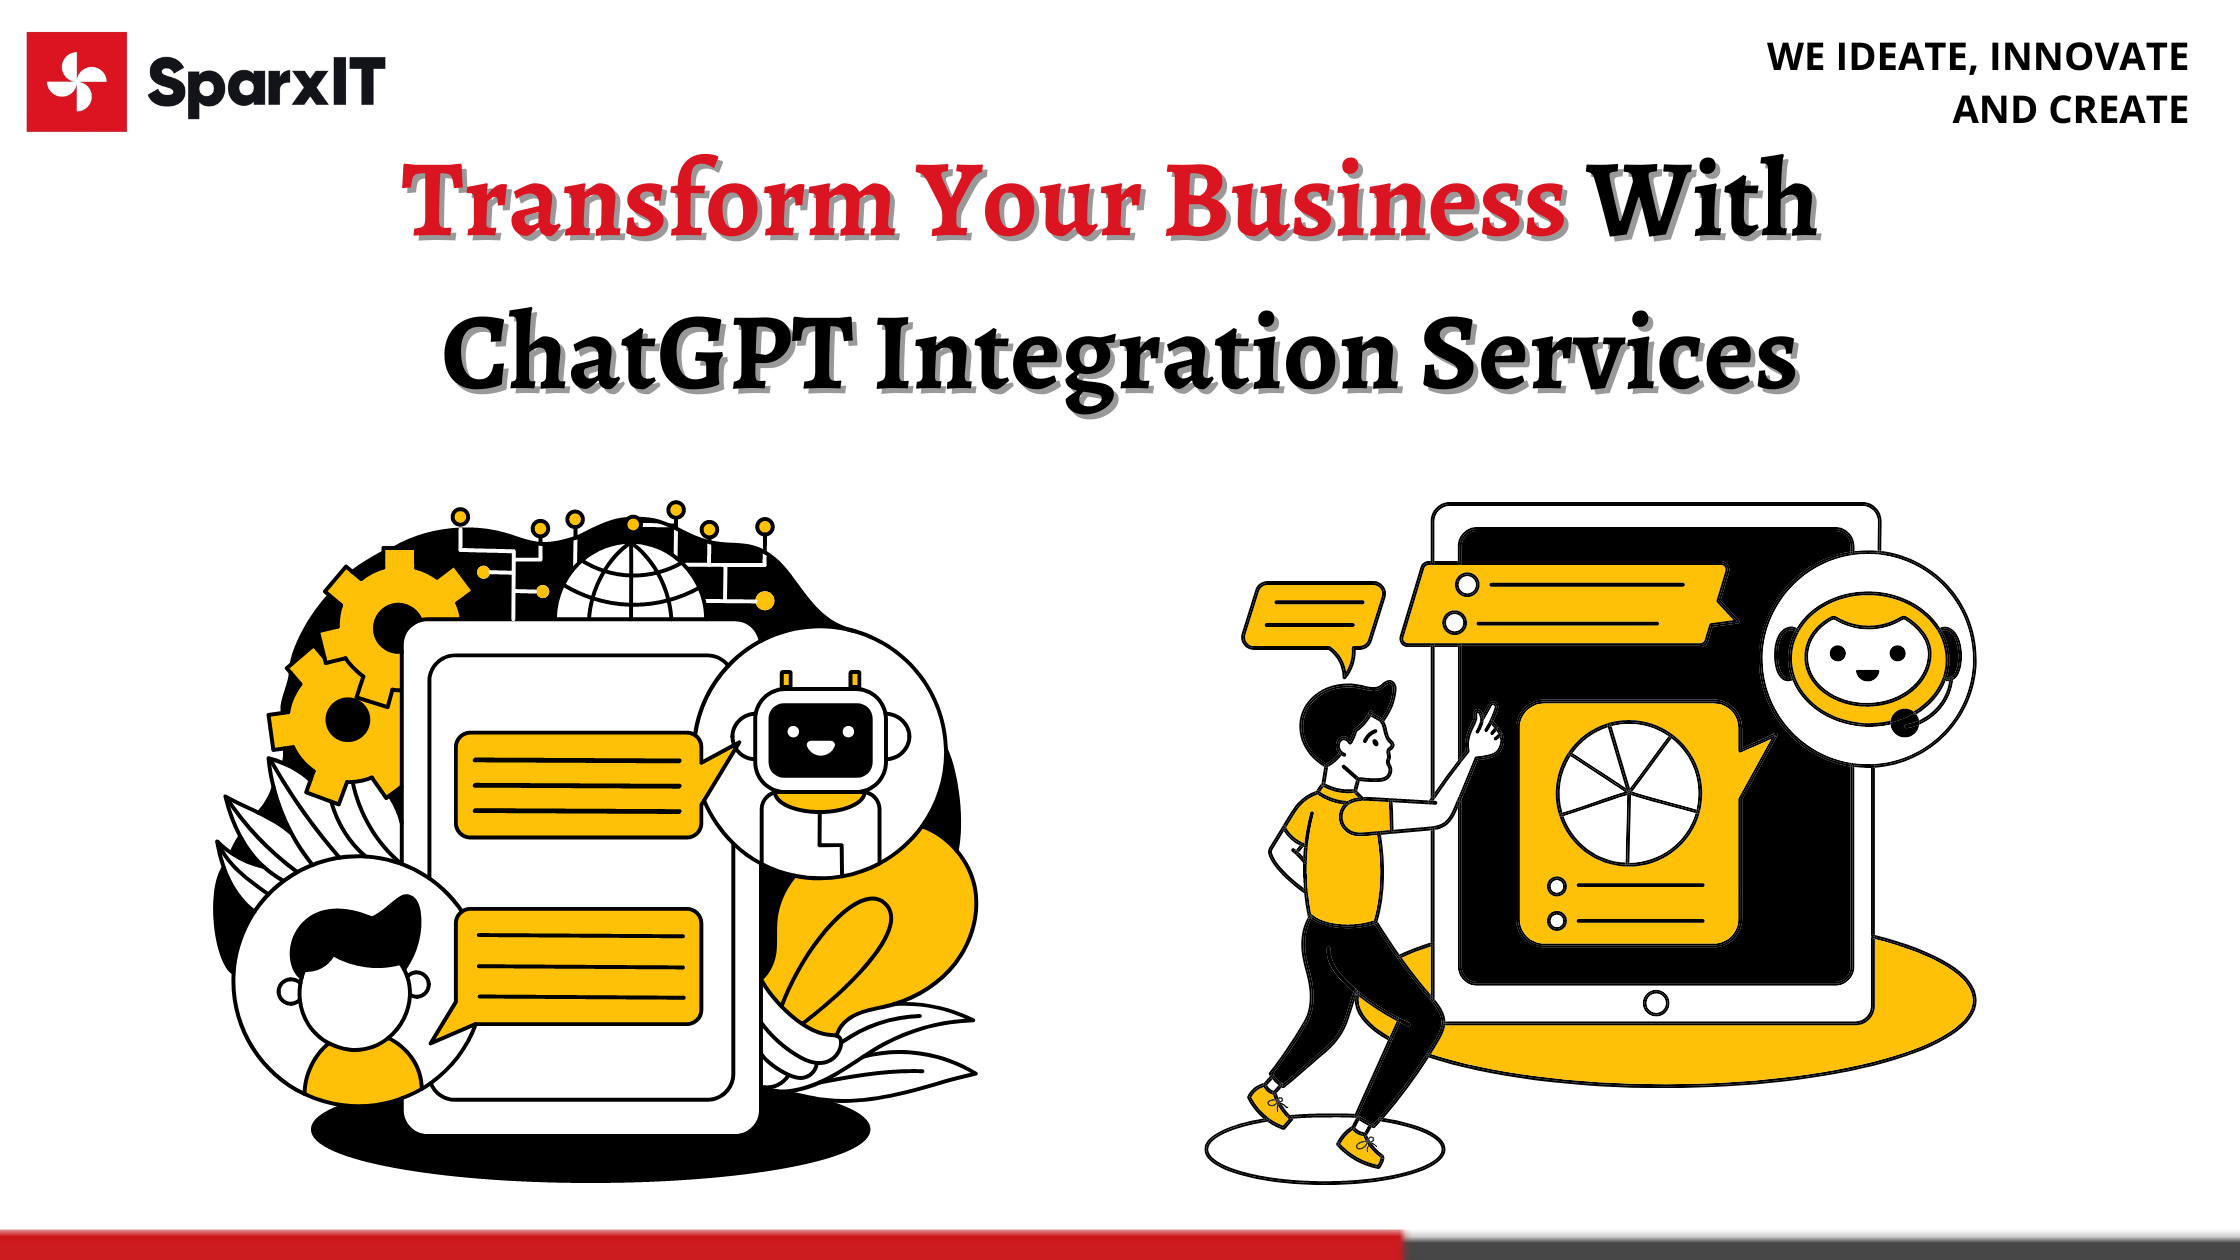 Transform Your Business With ChatGPT Integration Services